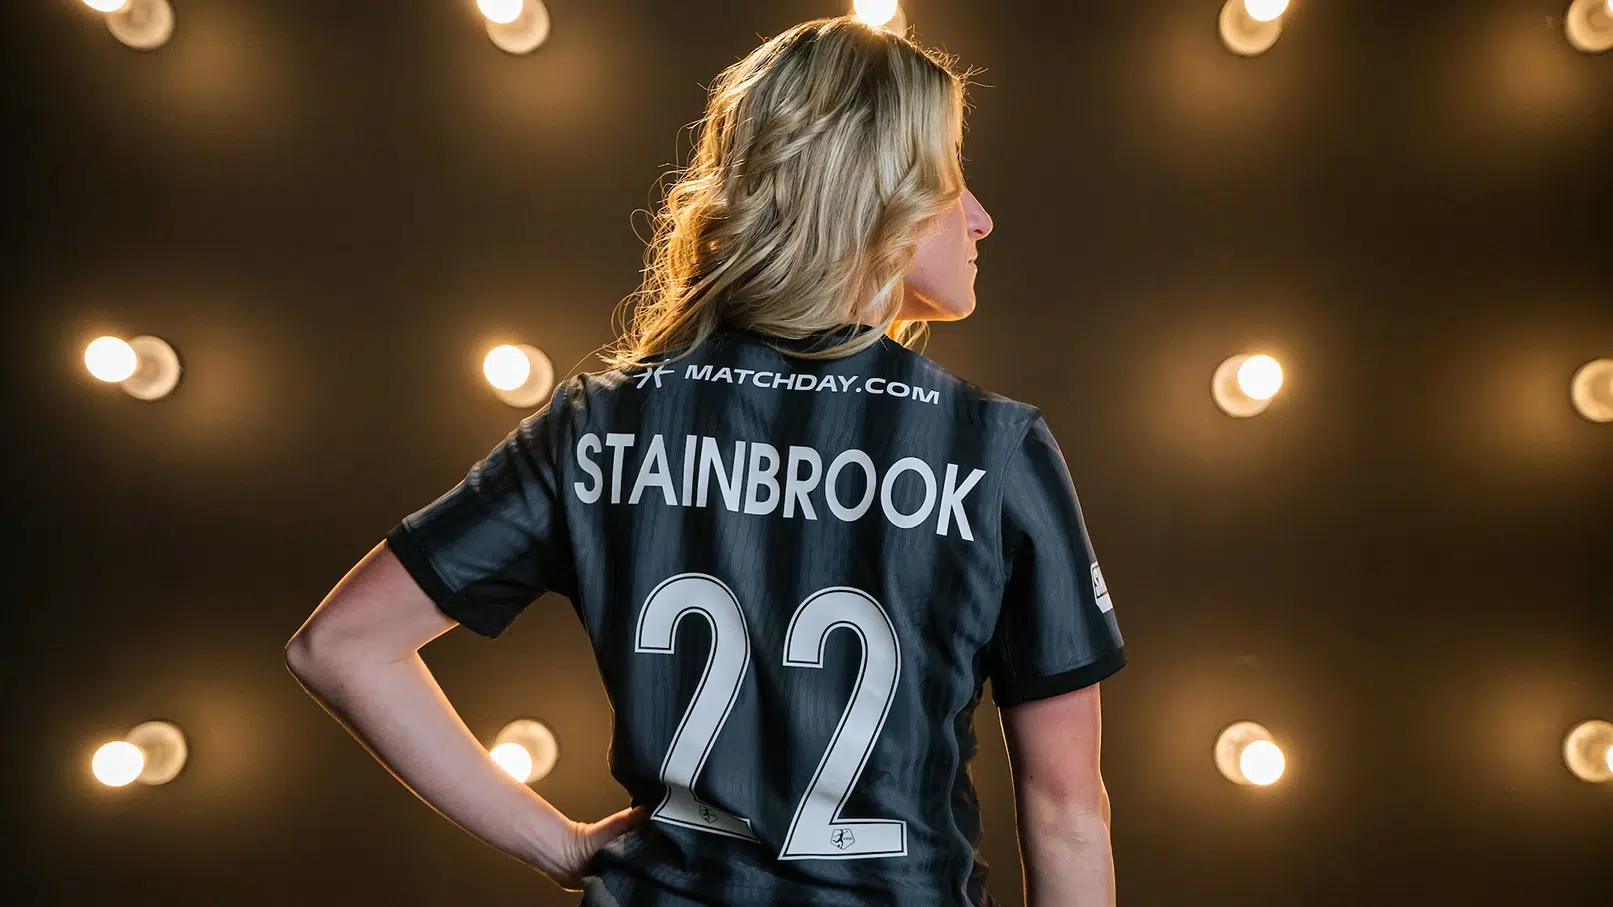 A photo showing the back of Heather Stainbrook's black Spirit jersey. She is standing in front of a wall of lightbulbs and her blonde hair is curled.